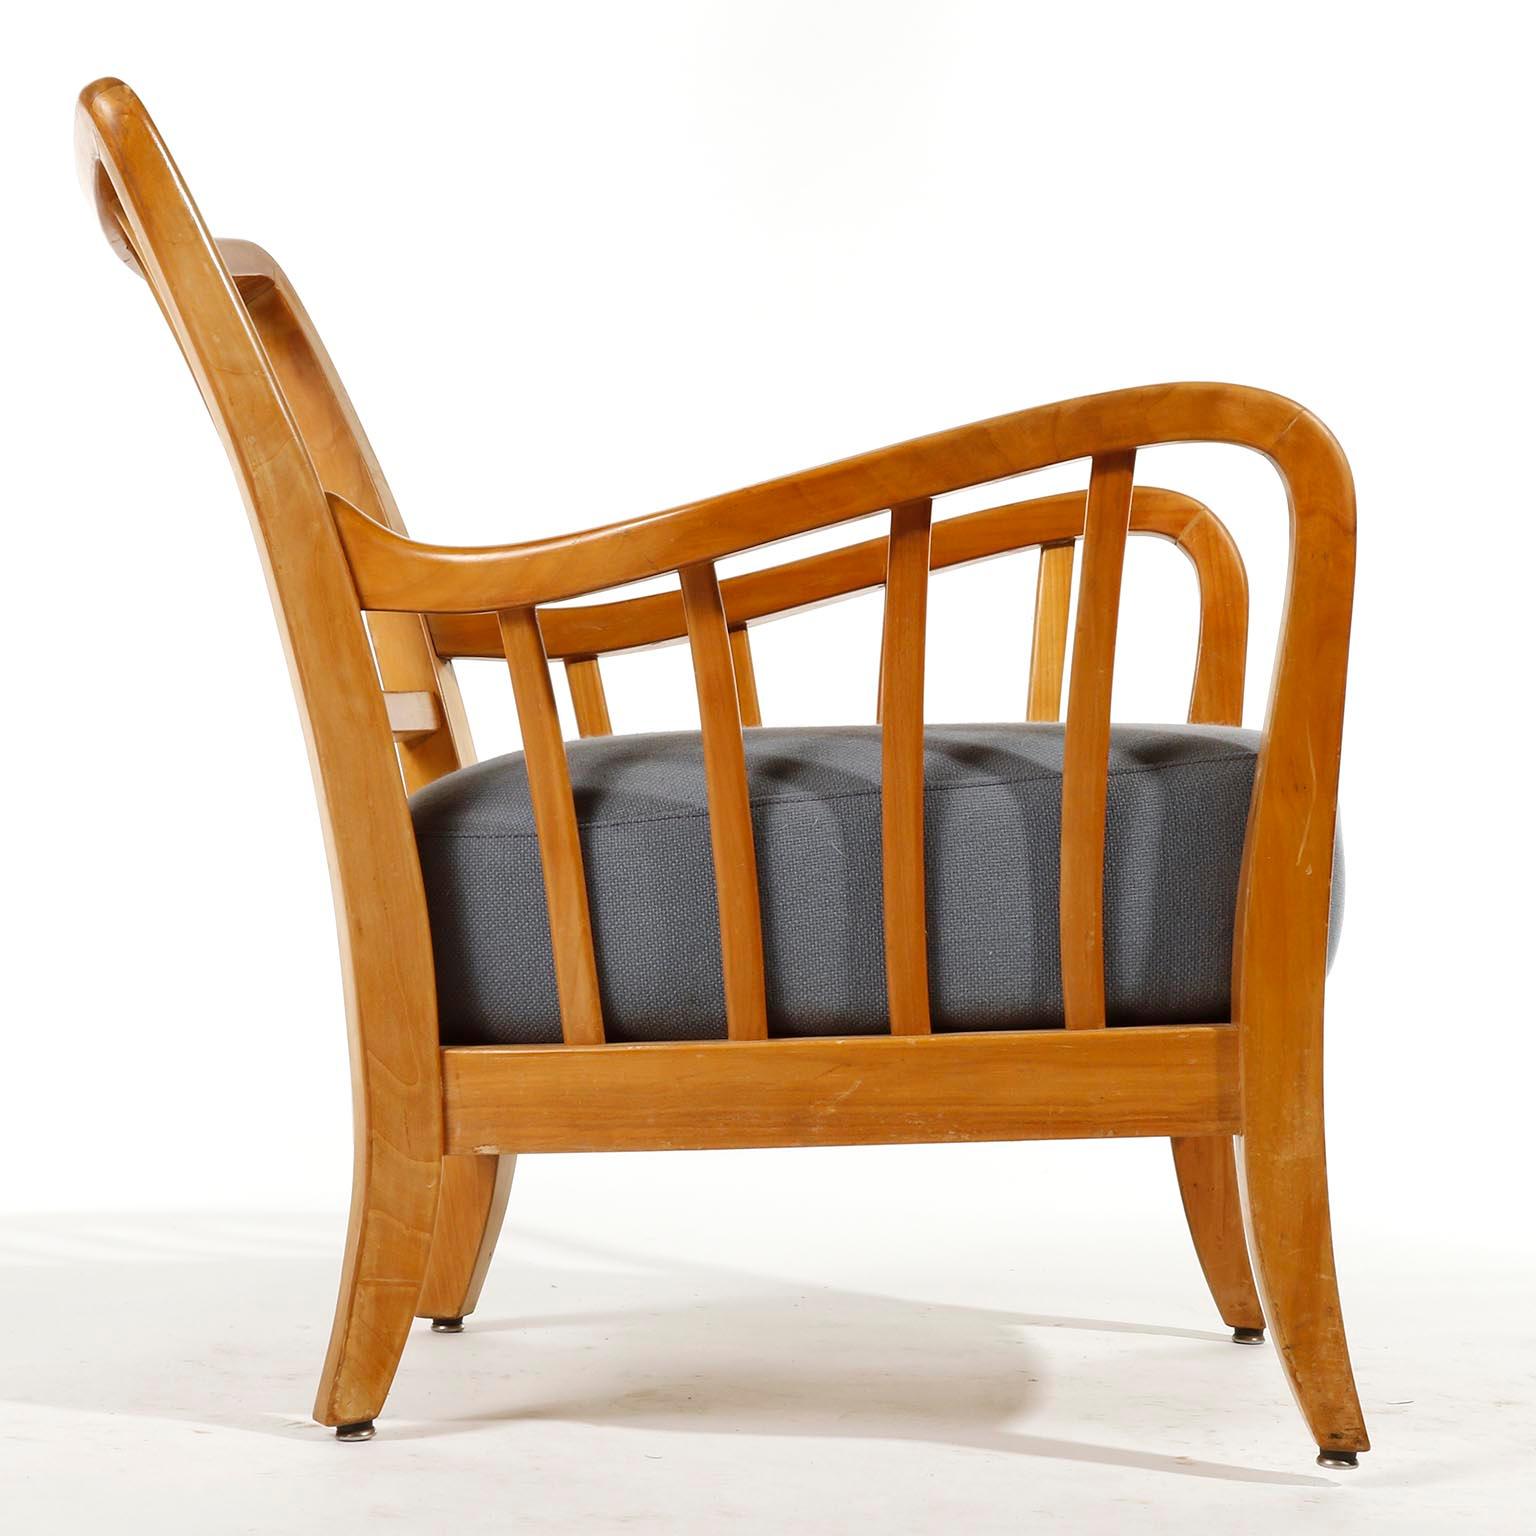 Mid-20th Century Pair of Armchairs Lounge Chairs Wood, Attributed to Josef Frank, Thonet, 1940